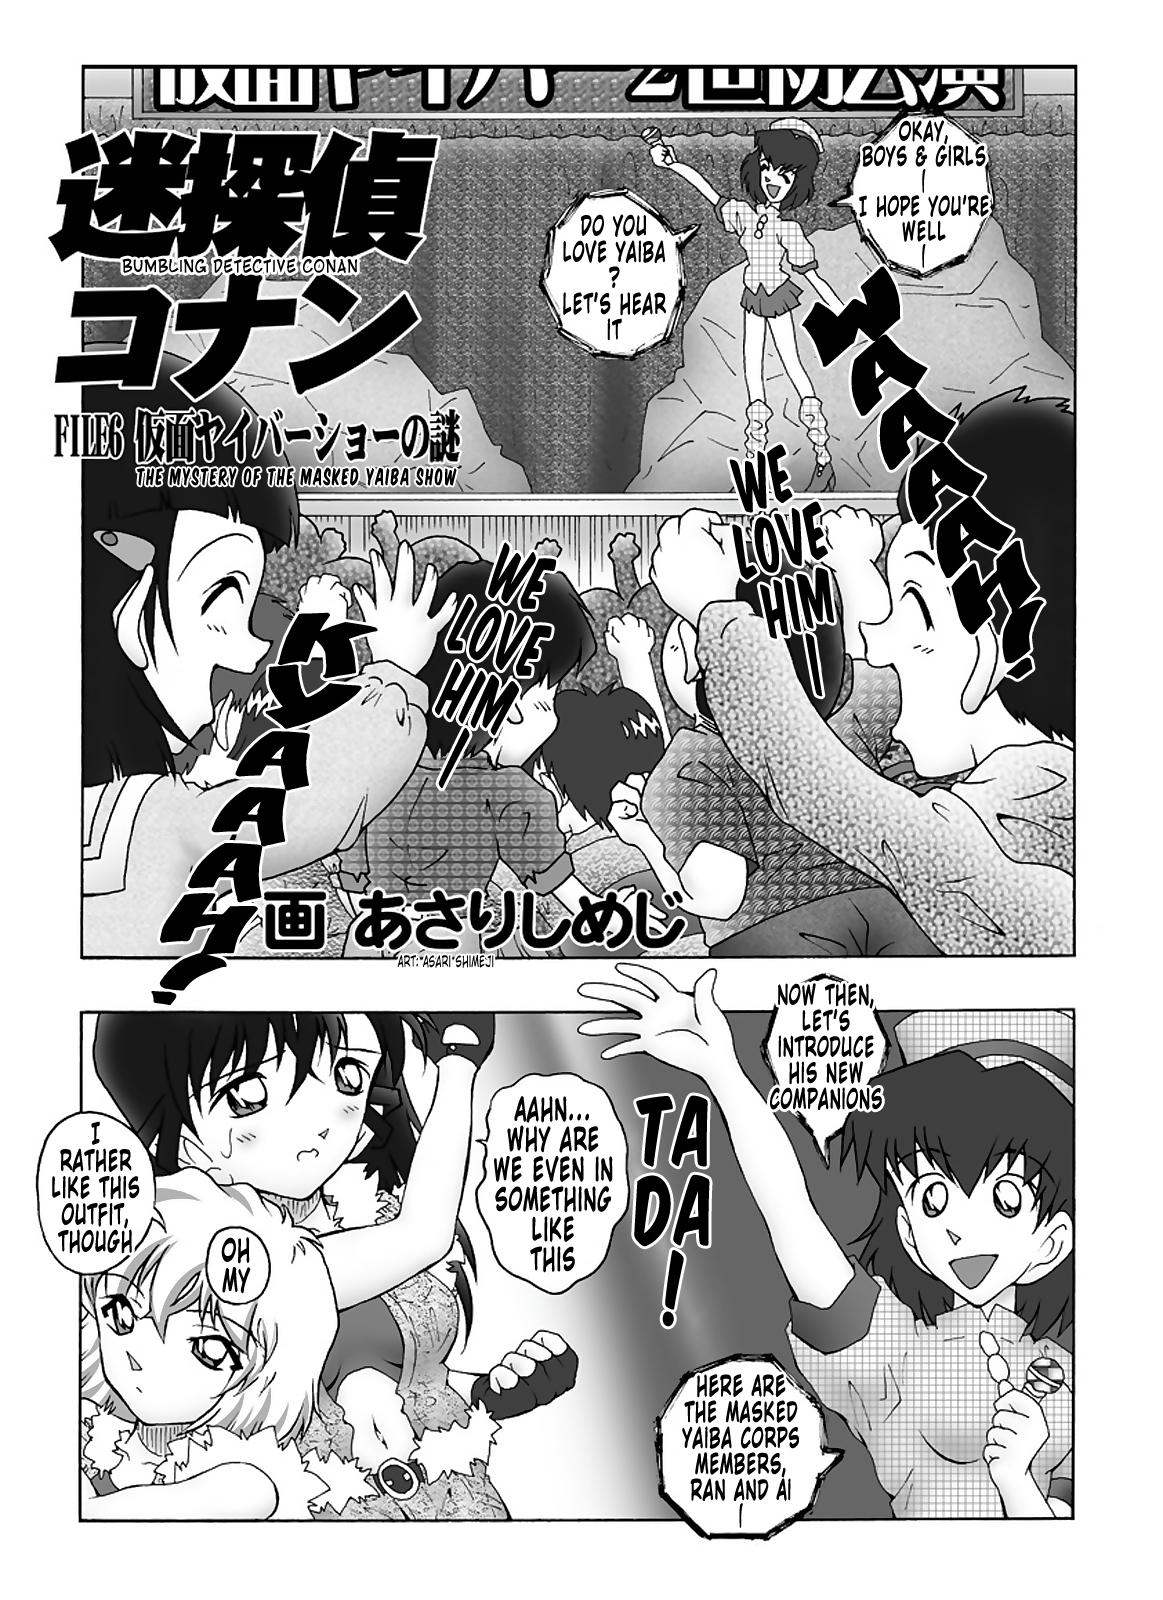 Fun Bumbling Detective Conan - File 6: The Mystery Of The Masked Yaiba Show - Detective conan Gorgeous - Page 4